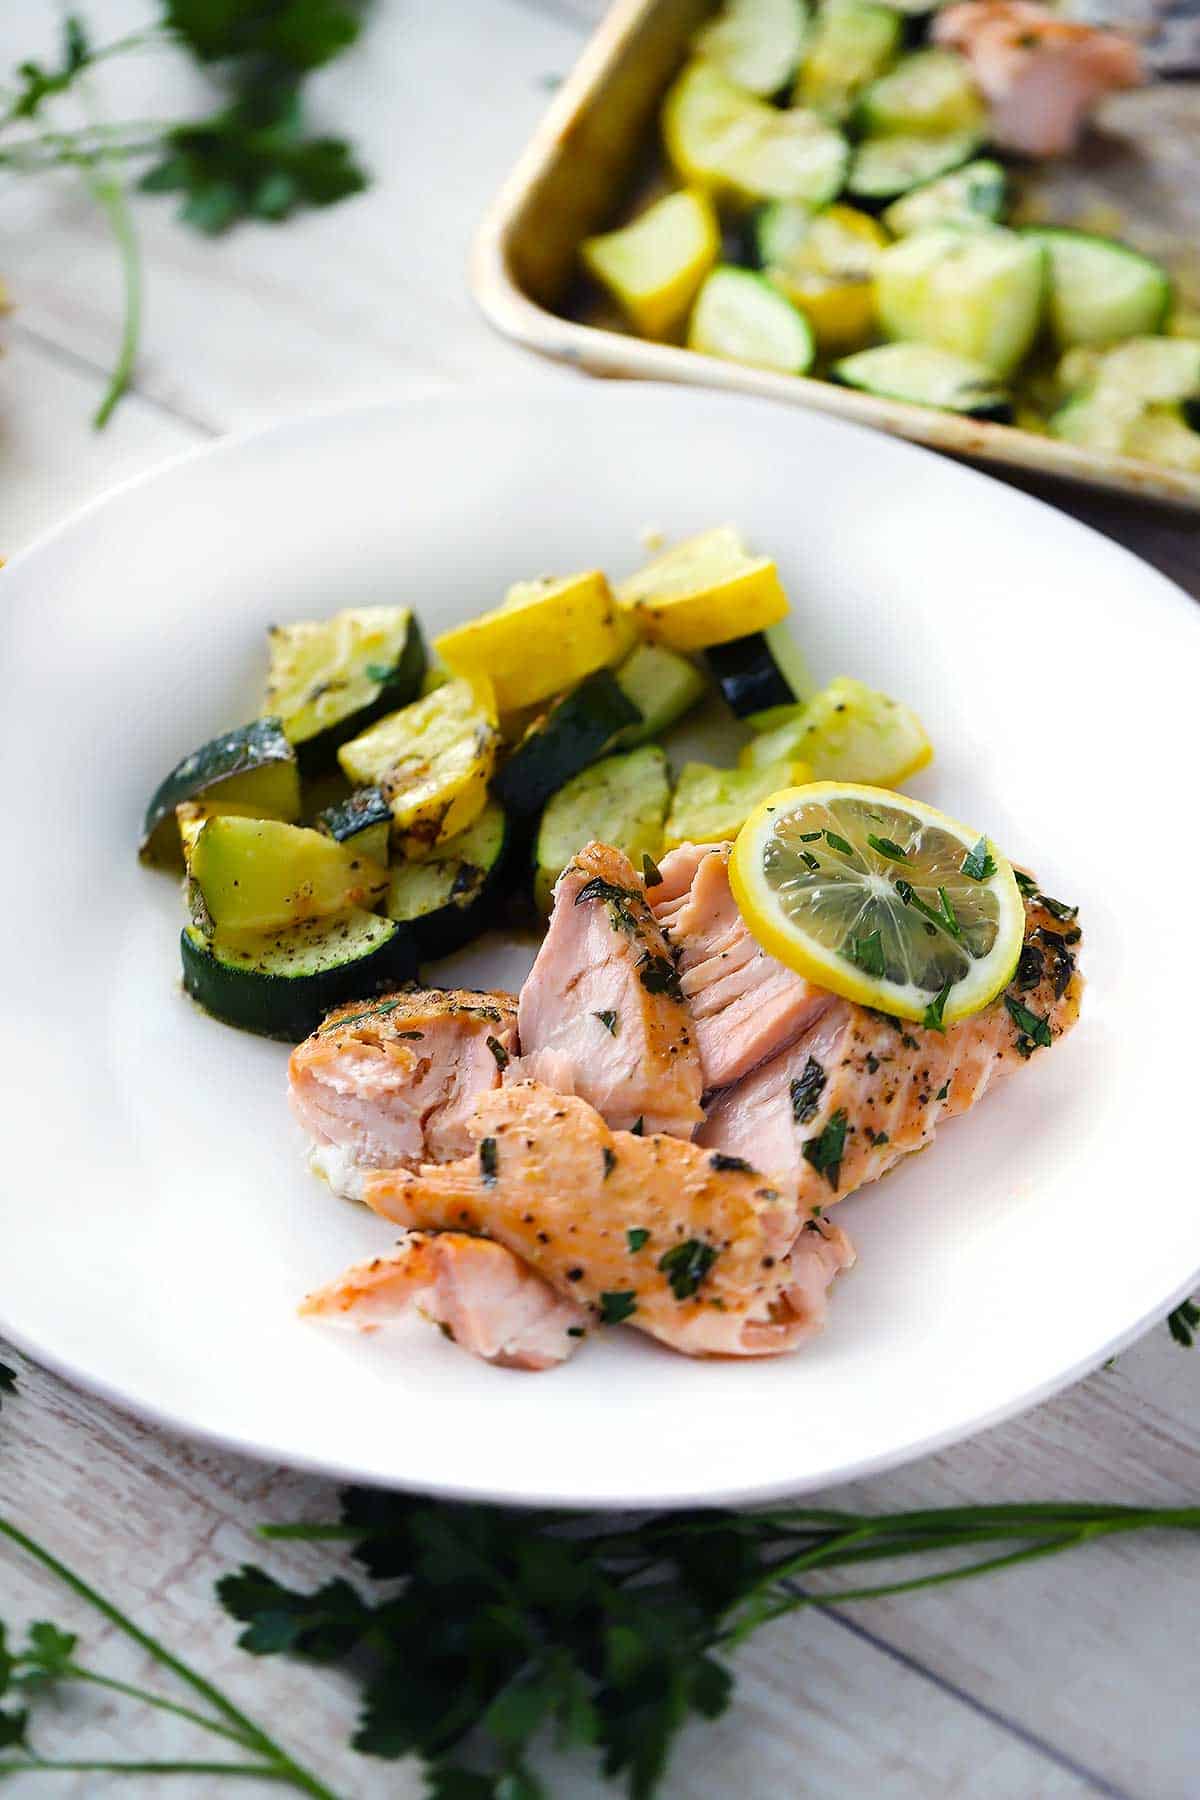 Salmon, zucchini, and summer squash on a plate